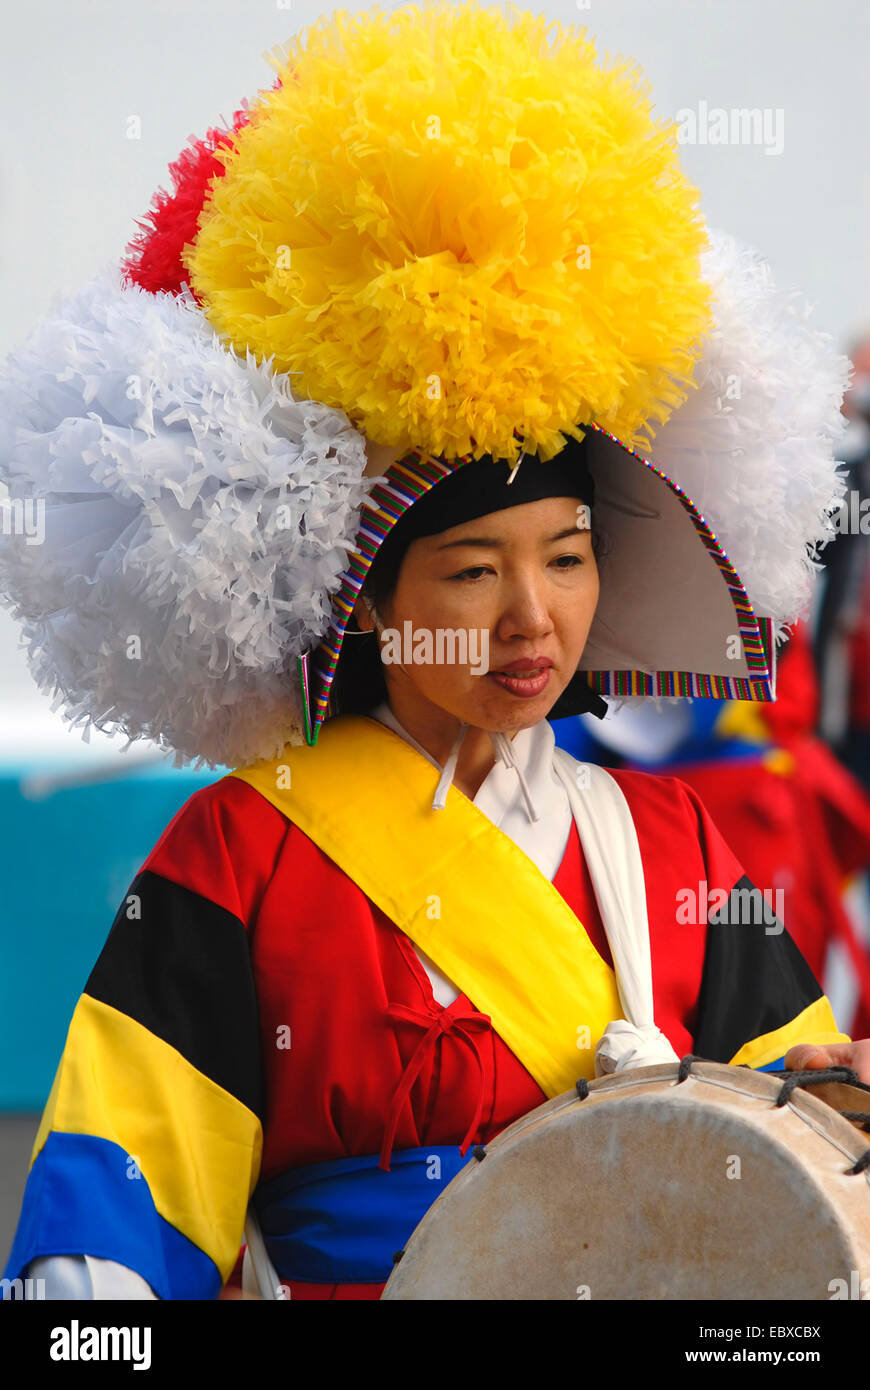 Korean Drummer in traditional costume performing during a performance, South Korea, Incheon Stock Photo